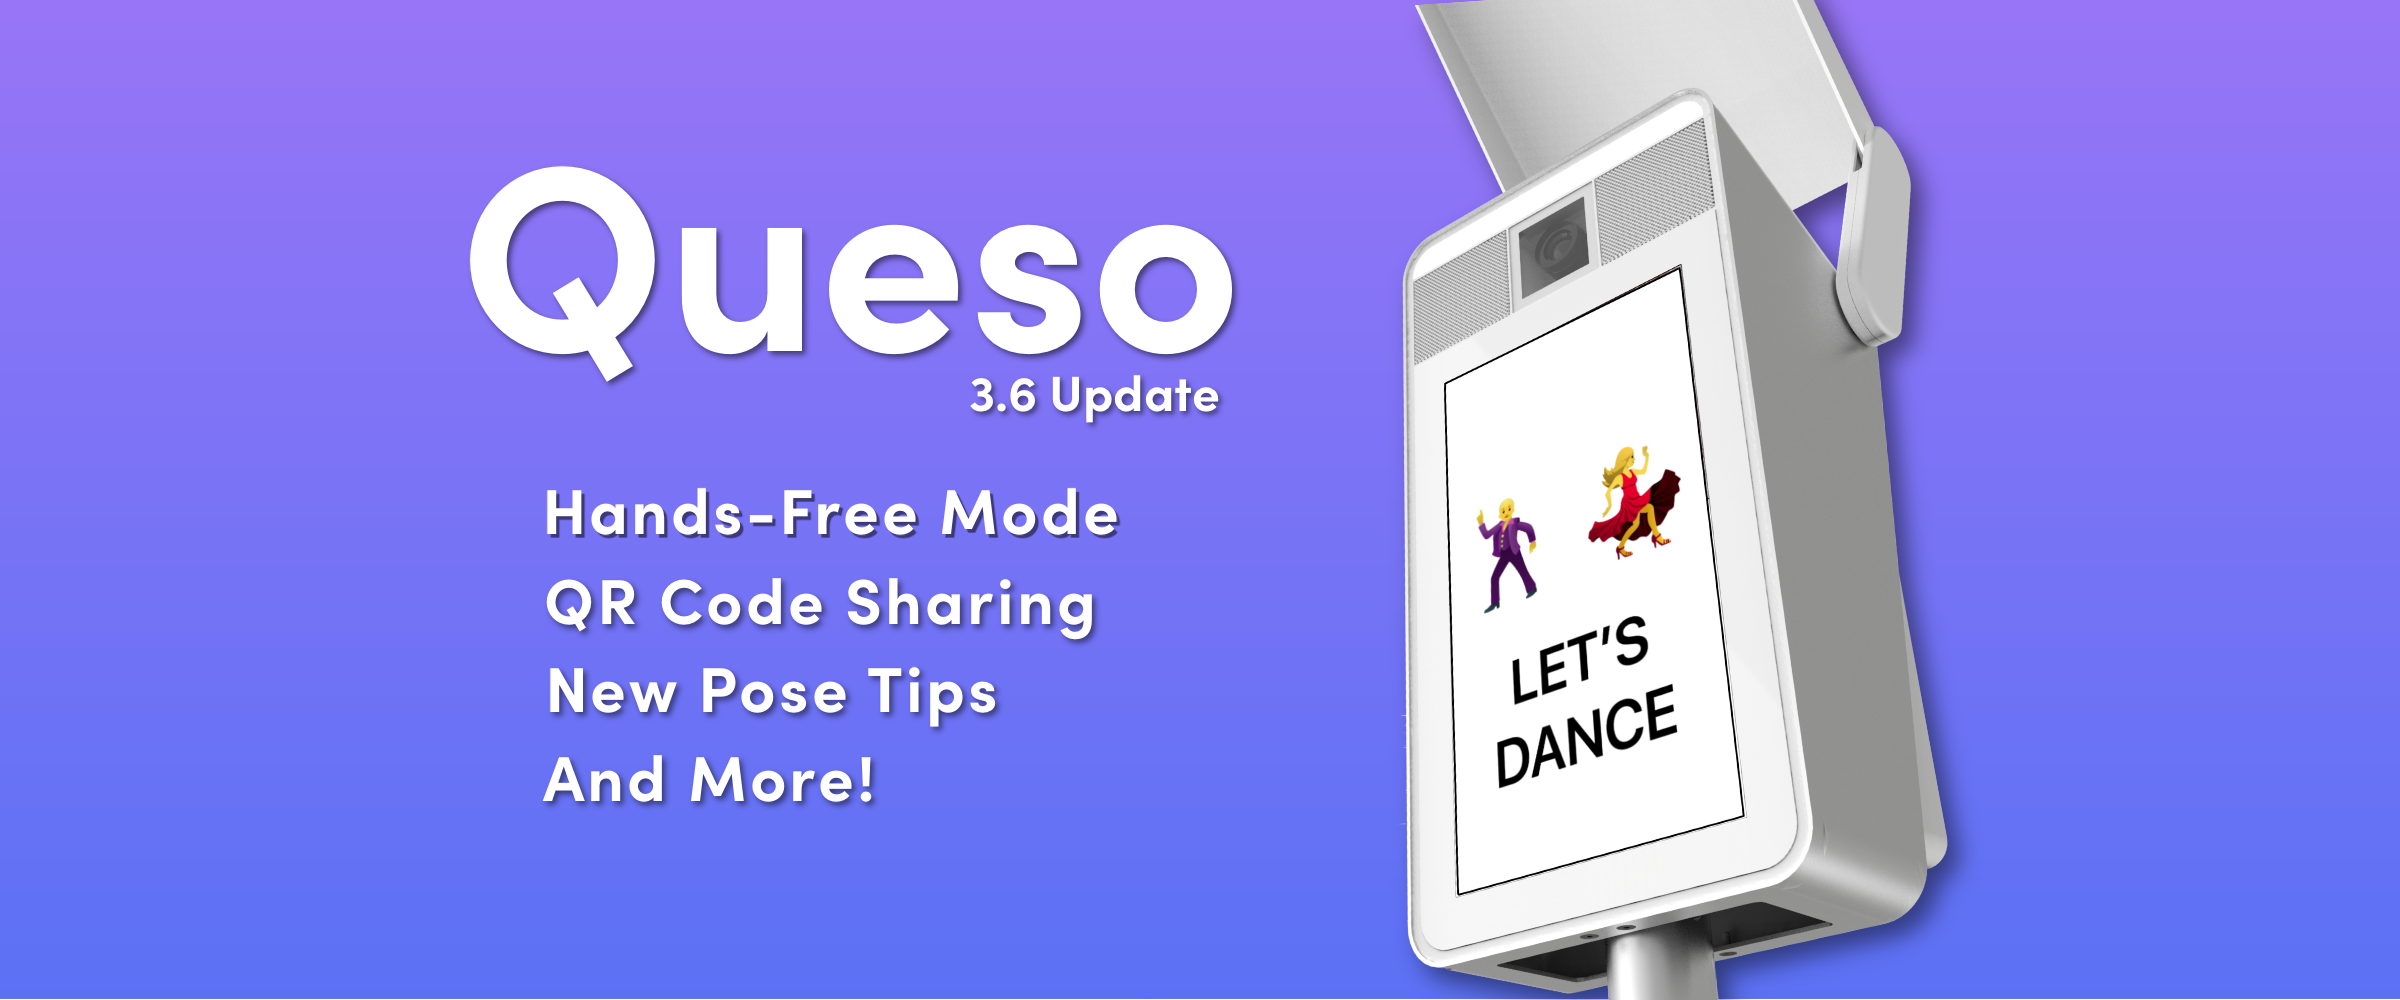 Queso 3.6 Update: Hands Free Mode and QR Code. Plus New Interfaces and Pose Tips!